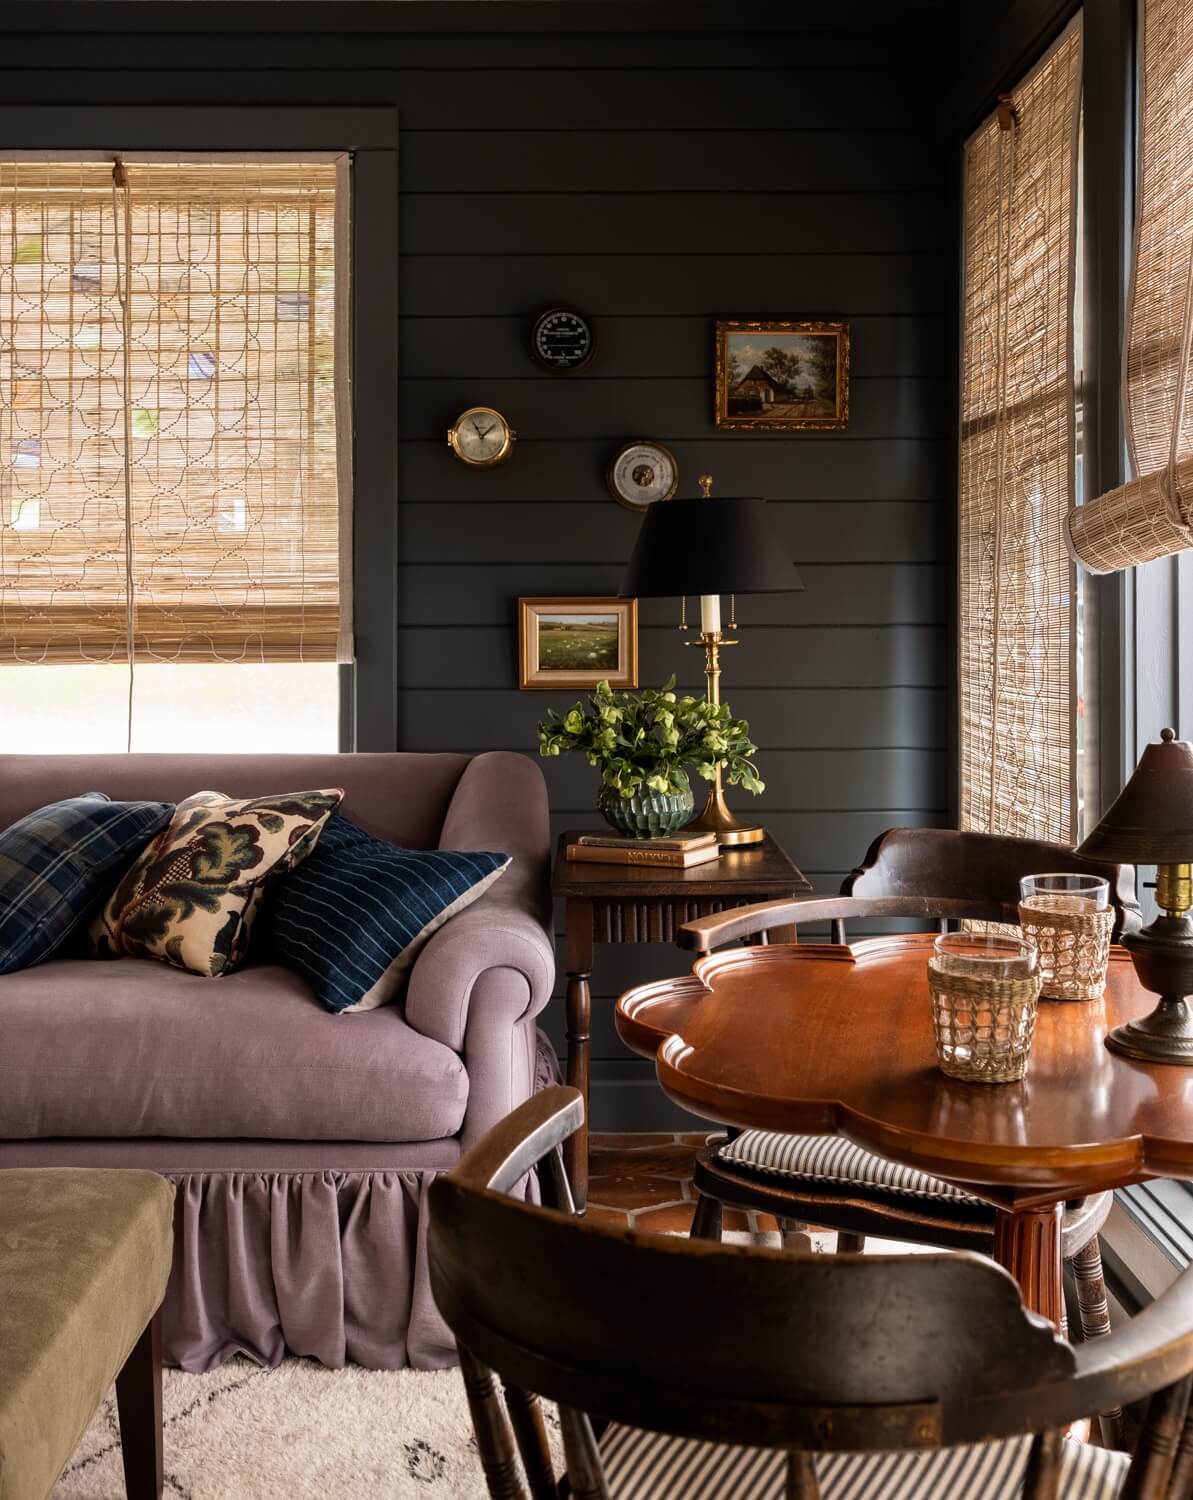 Heidi-Caillier-Design-CT-country-house-Dutchess-County-design-sunroom-dark-paint-indian-chx-blinds-purple-sofa-vintage-game-table-Nordroom